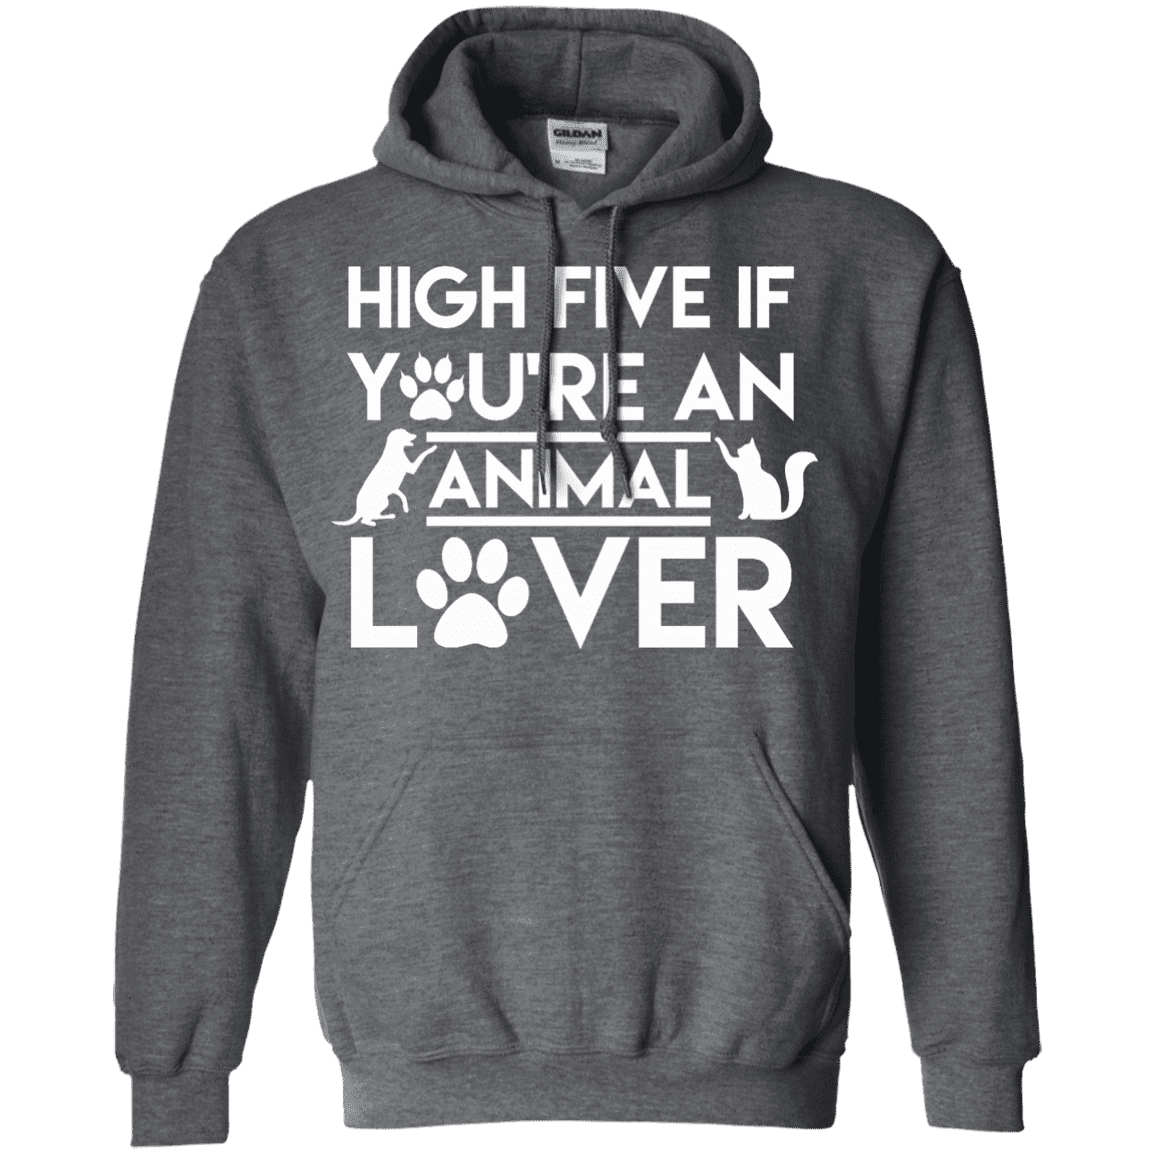 High Five If You're An Animal Lover - Hoodie.